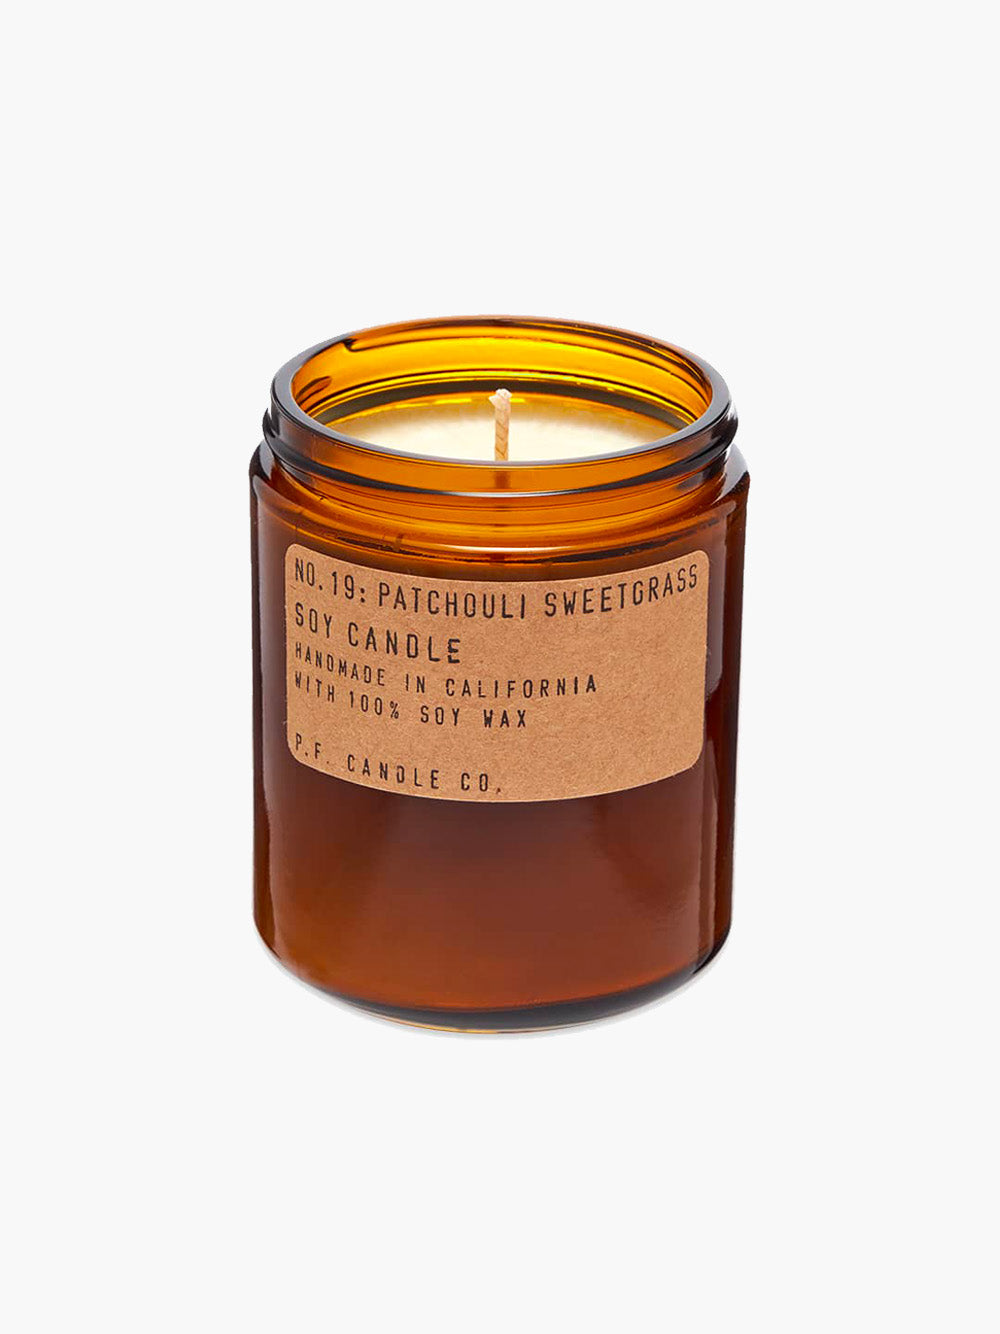 P.F. Candle Co. 204g Soy Candle - No.19 Patchouli Sweetgrass